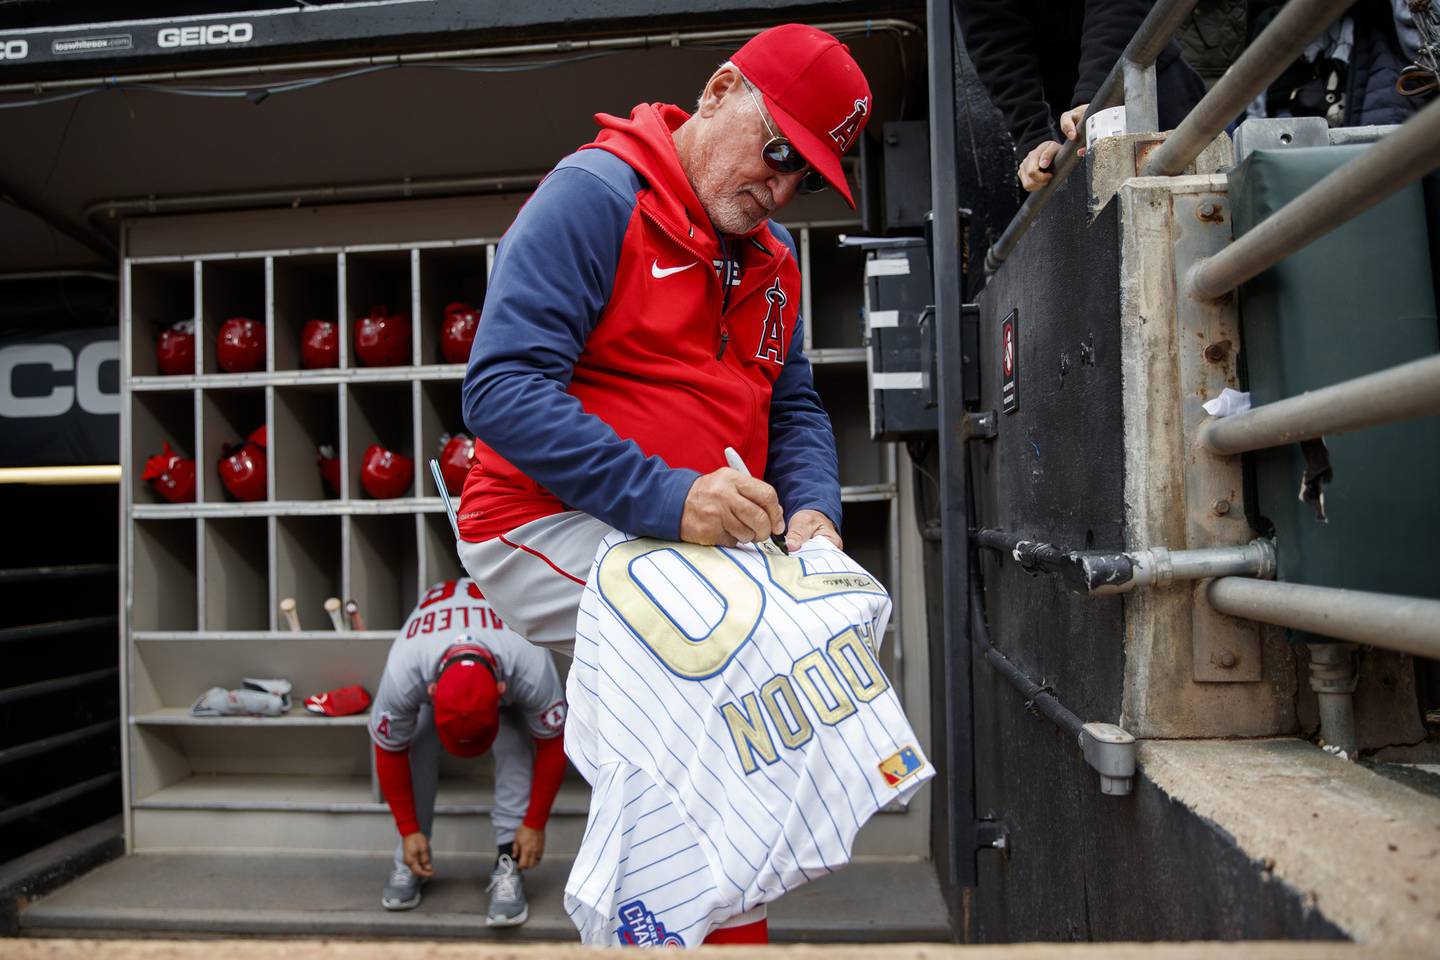 Angels manager Joe Maddon signs his former Cubs jersey before a game against the White Sox at Guaranteed Rate Field on May 1, 2022.